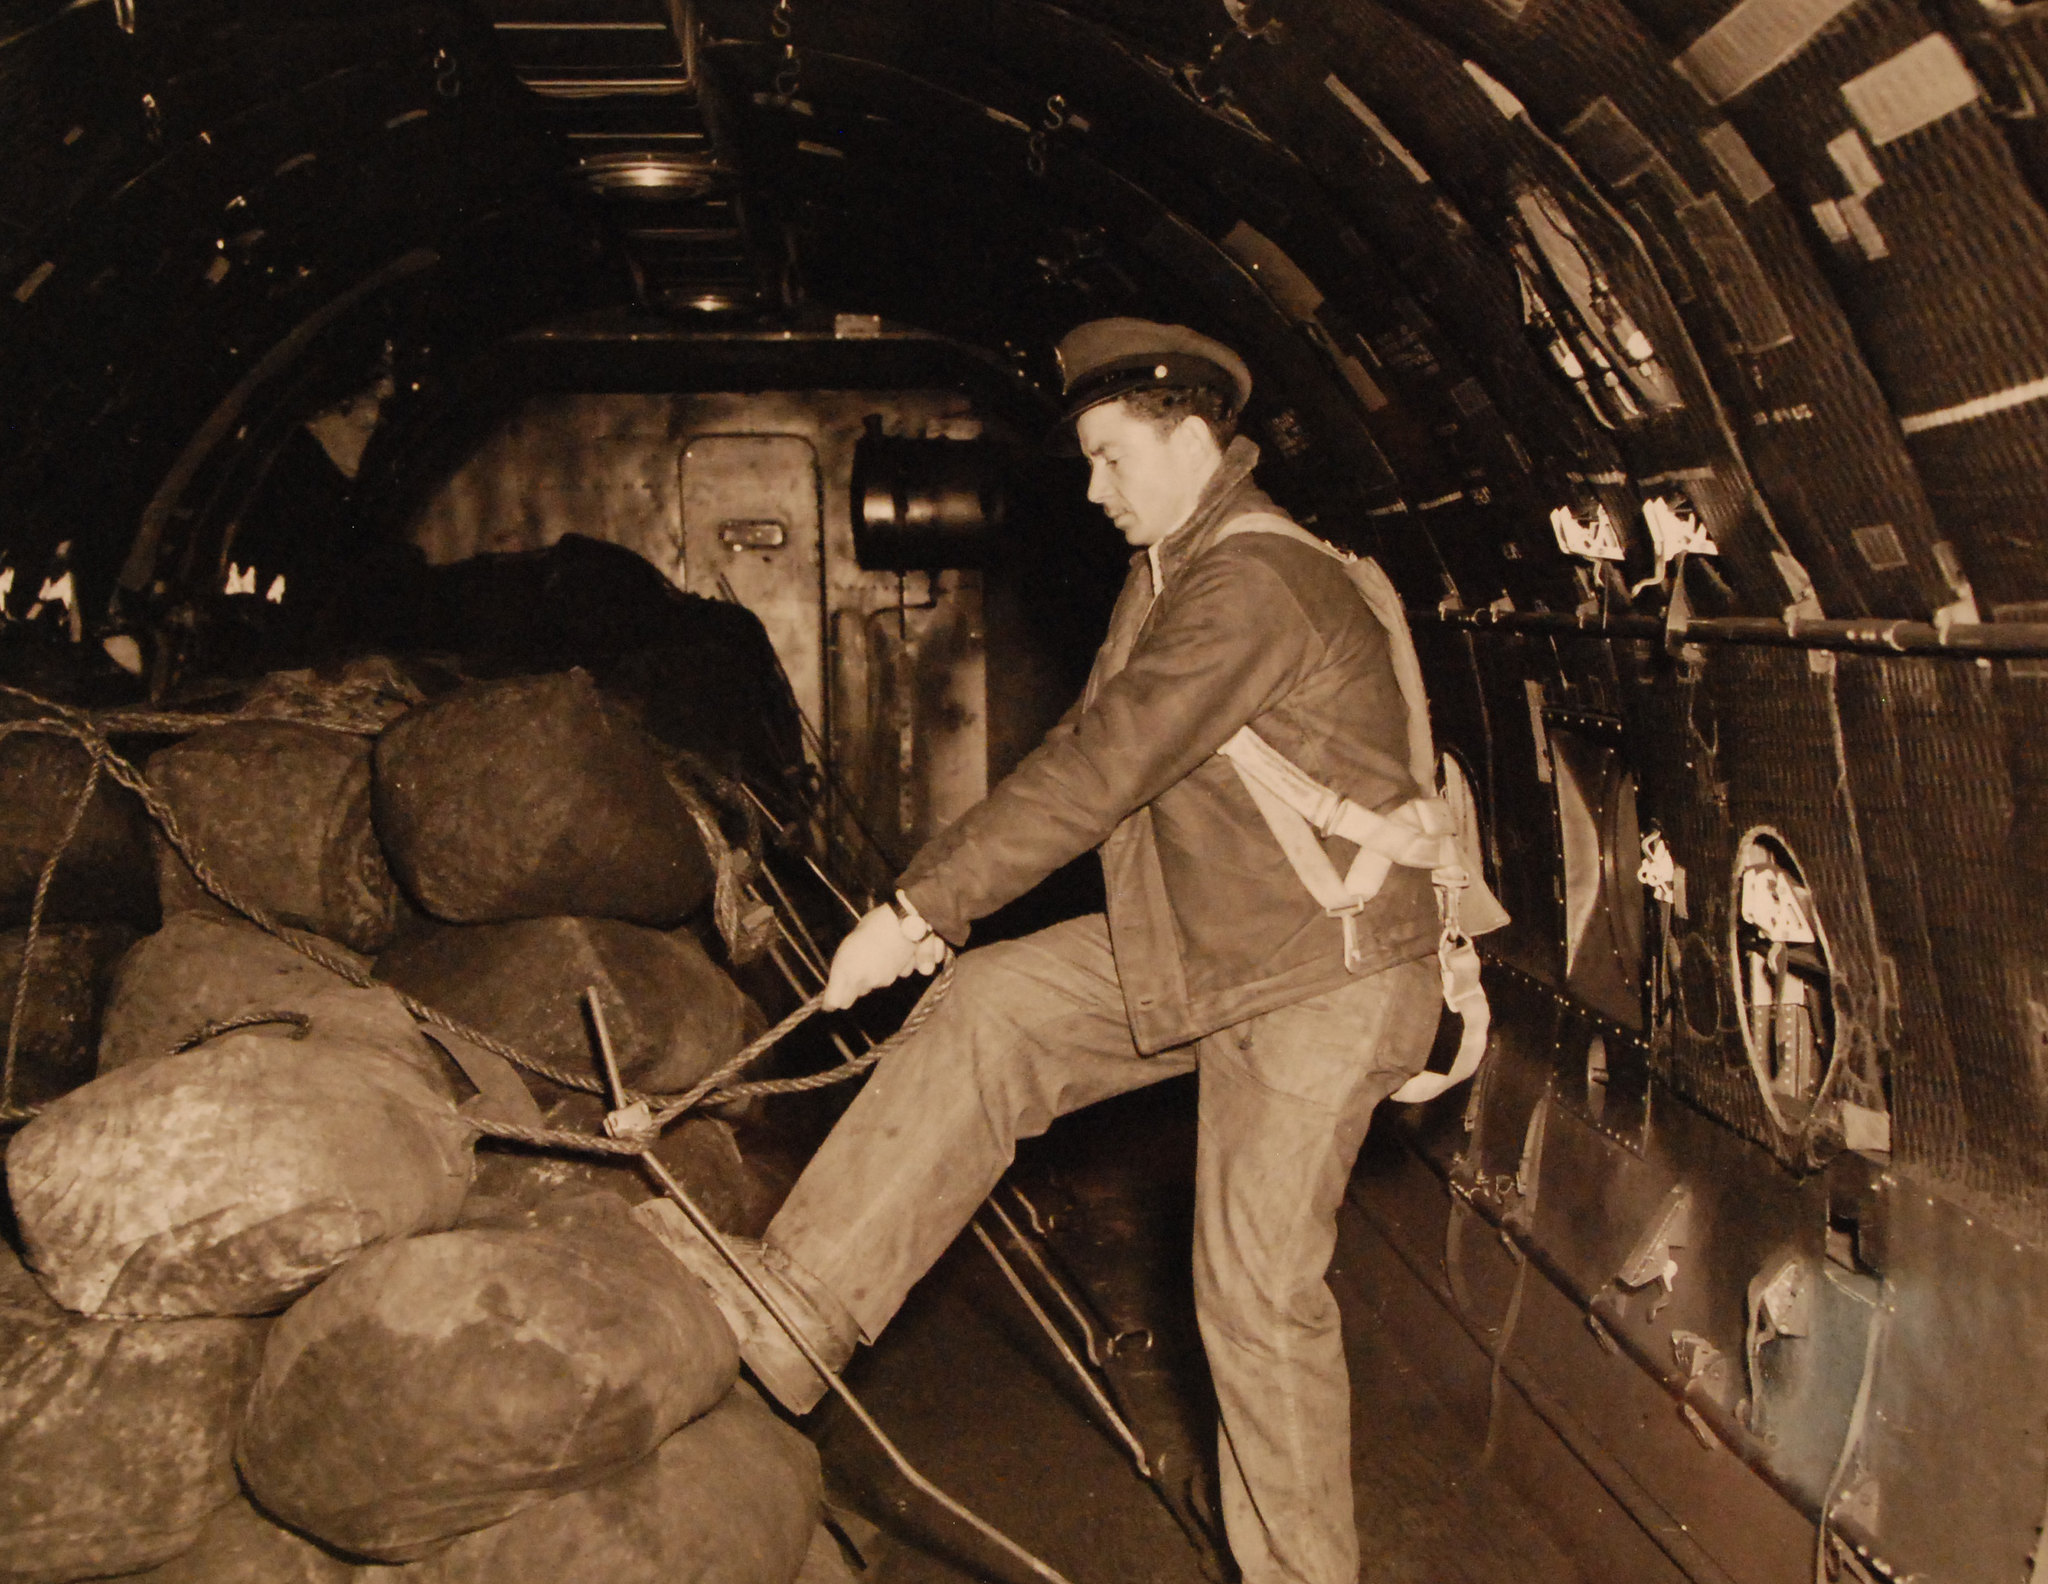 An American flight mechanic checks the latches on bags of coal to be delivered during the Berlin Airlift.